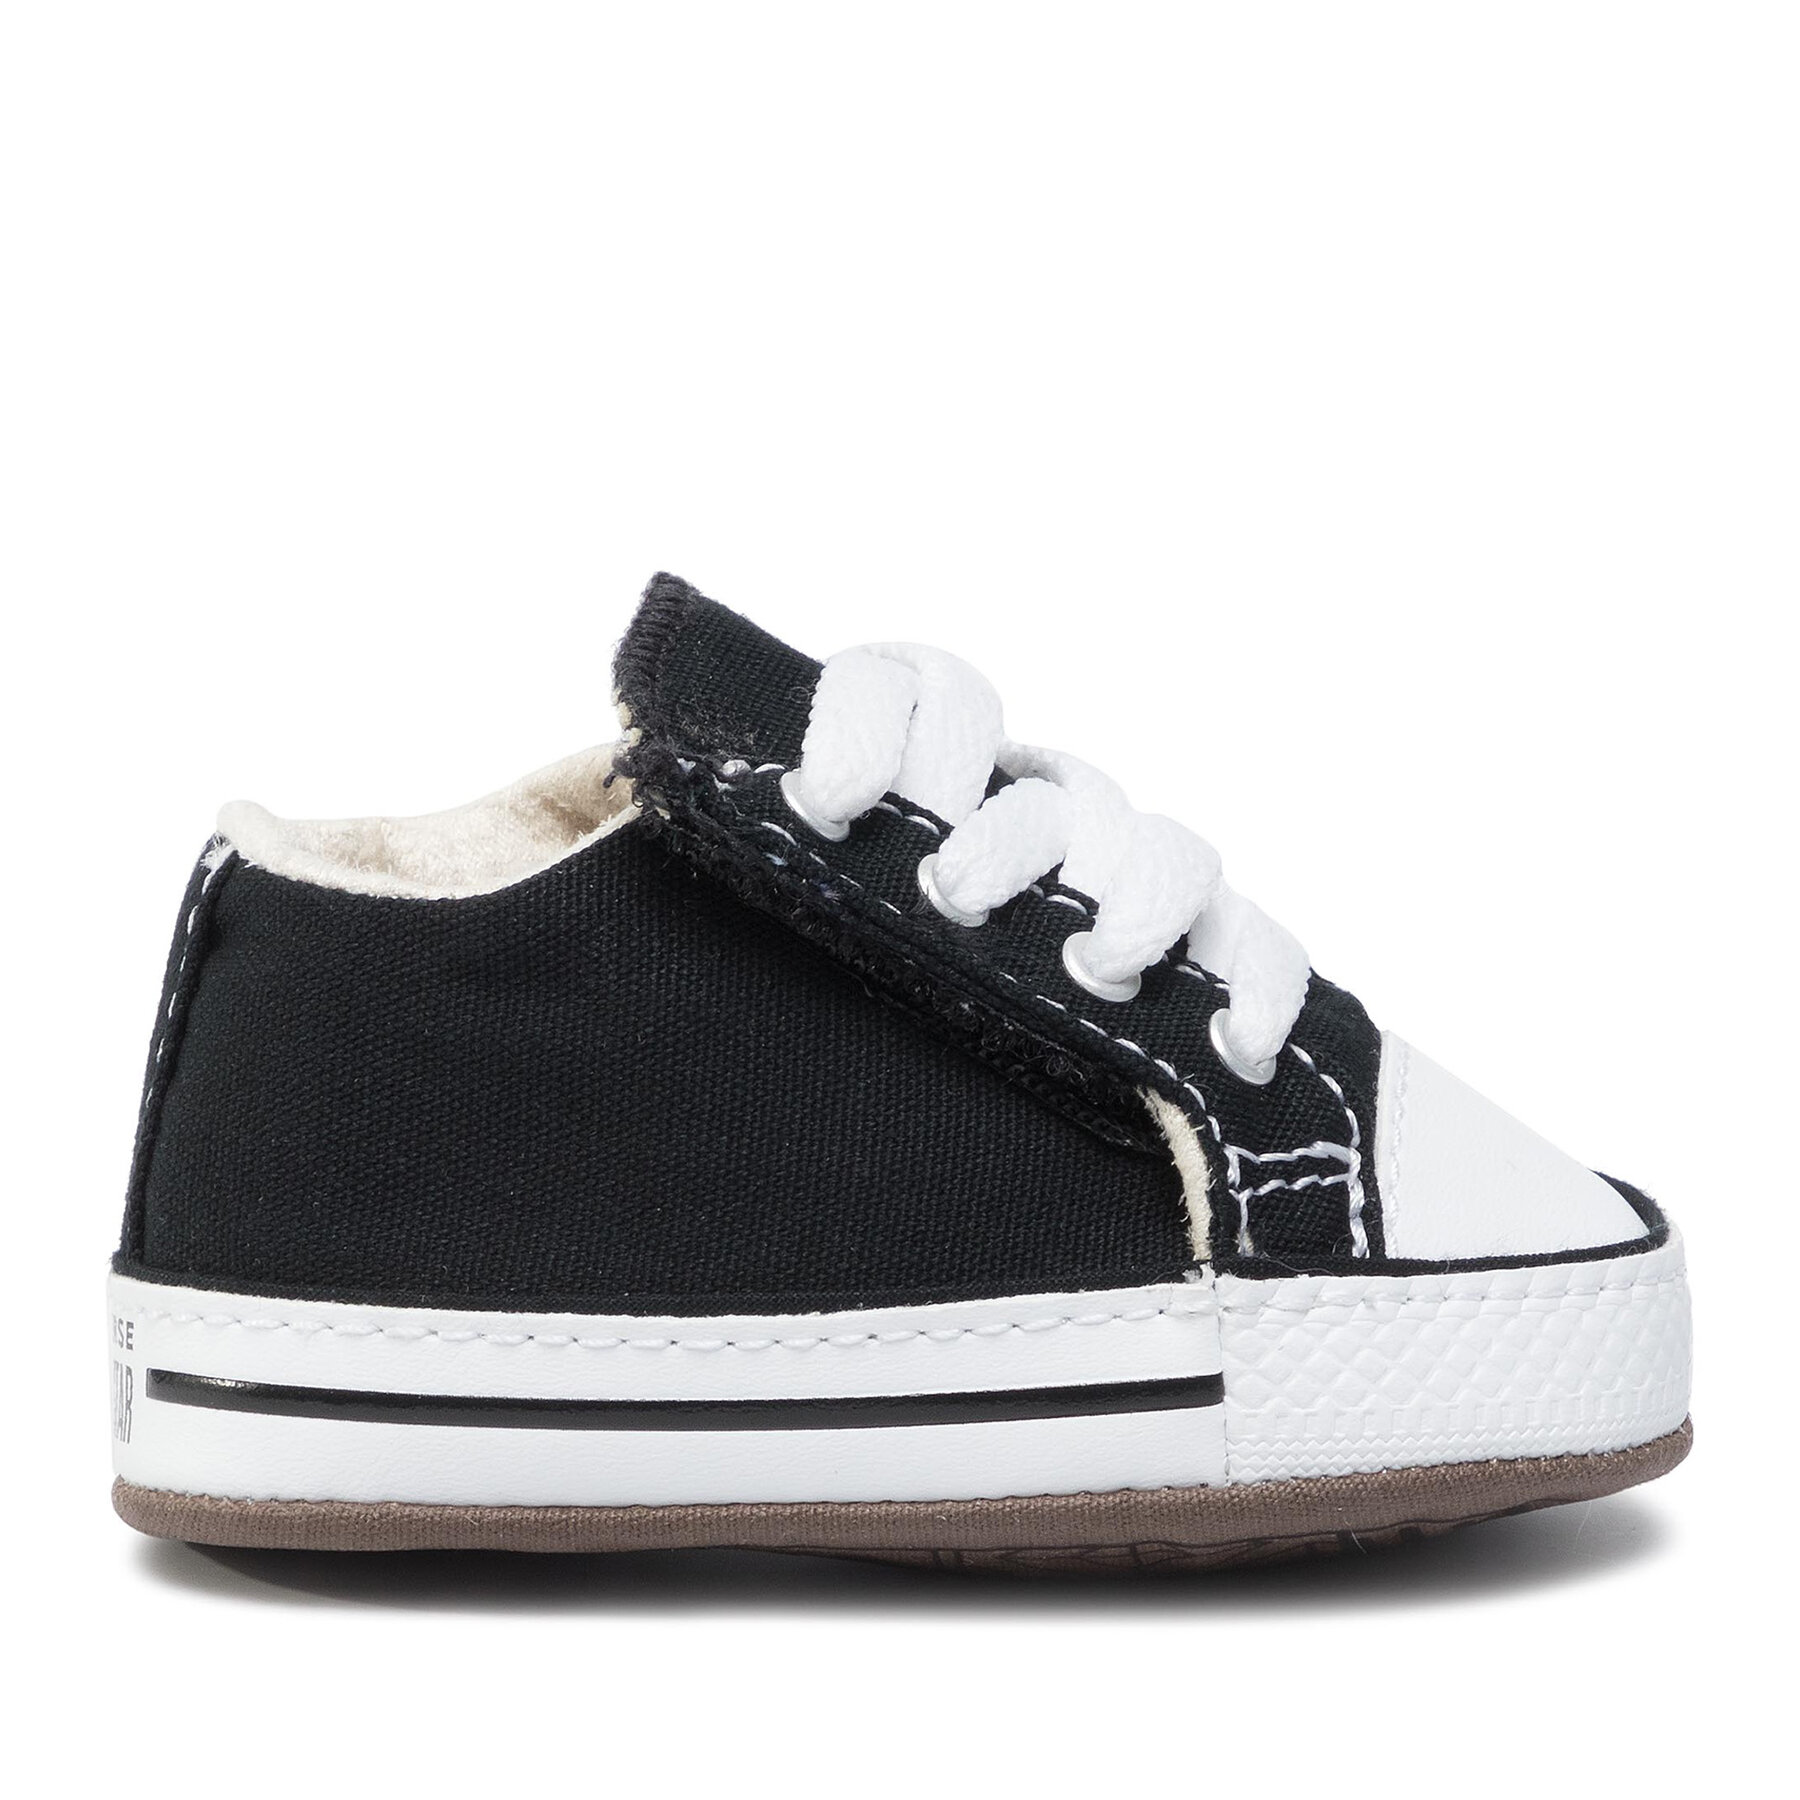 Sneakers aus Stoff Converse Ctas Cribster Mid 865156C Black/Natural Invory/White von Converse